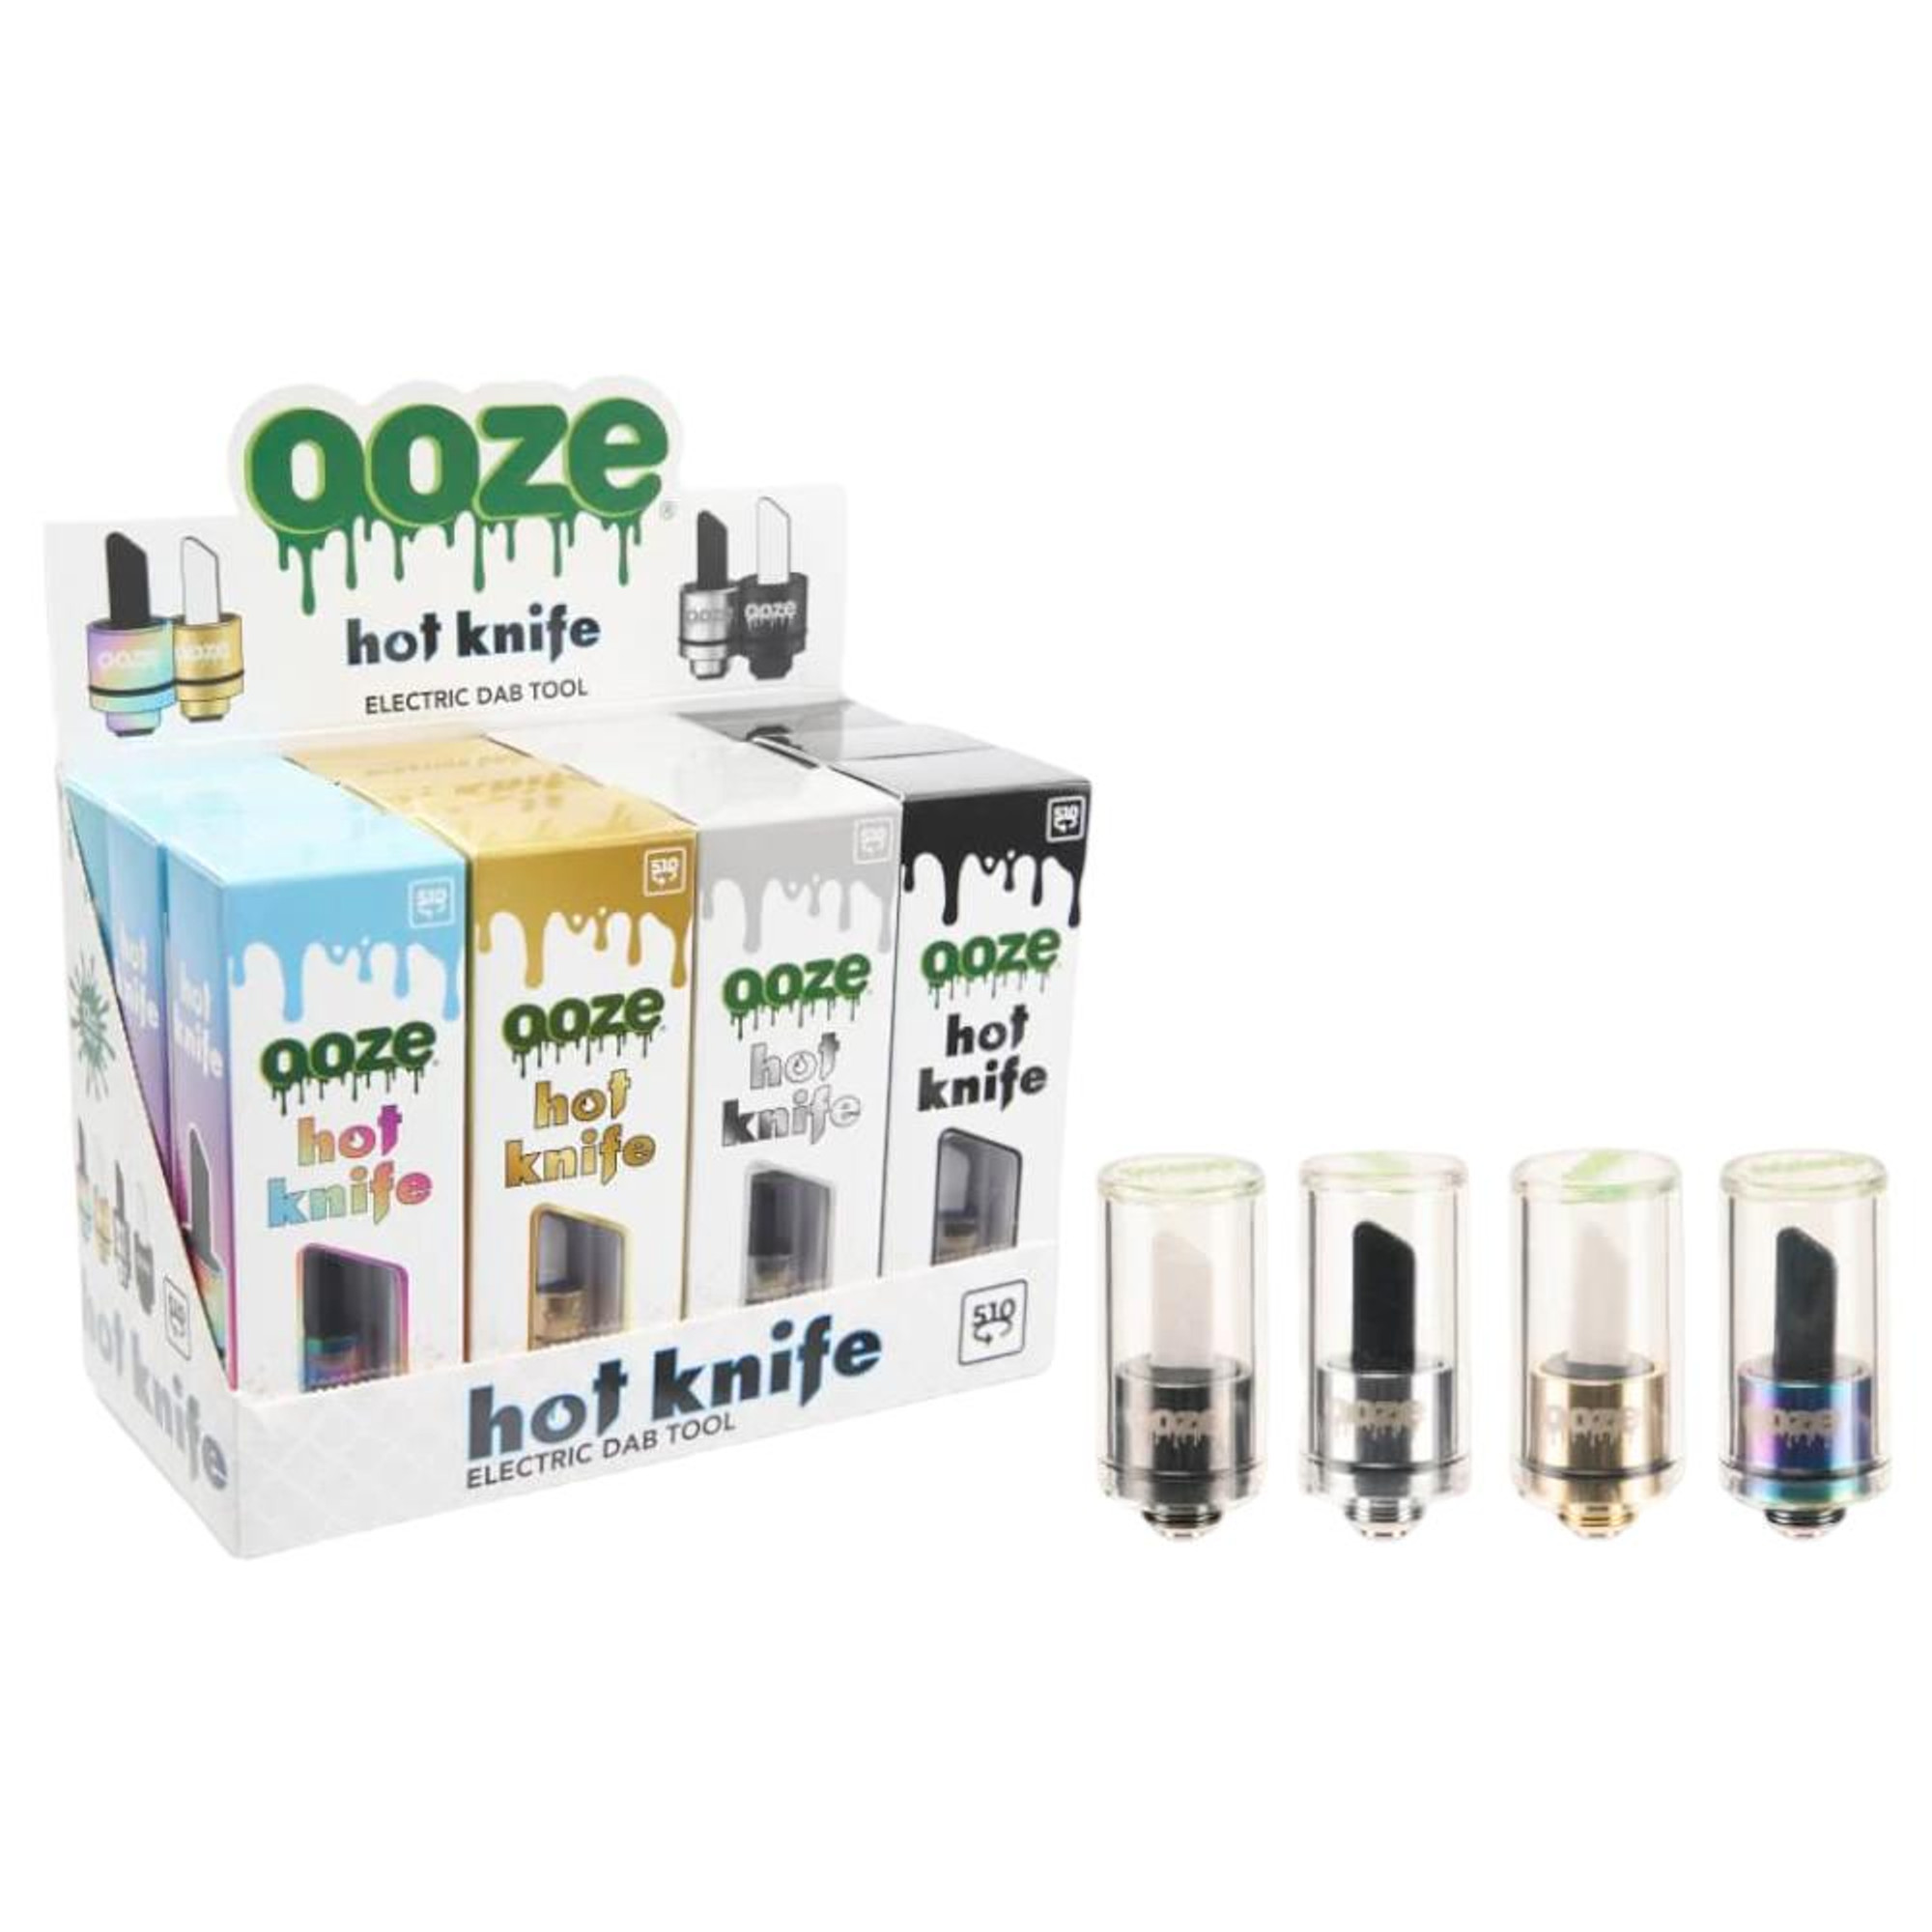 OOZE HOT KNIFE ELECTRIC DAB TOOL ASSORTED COLOR - 12CT DISPLAY